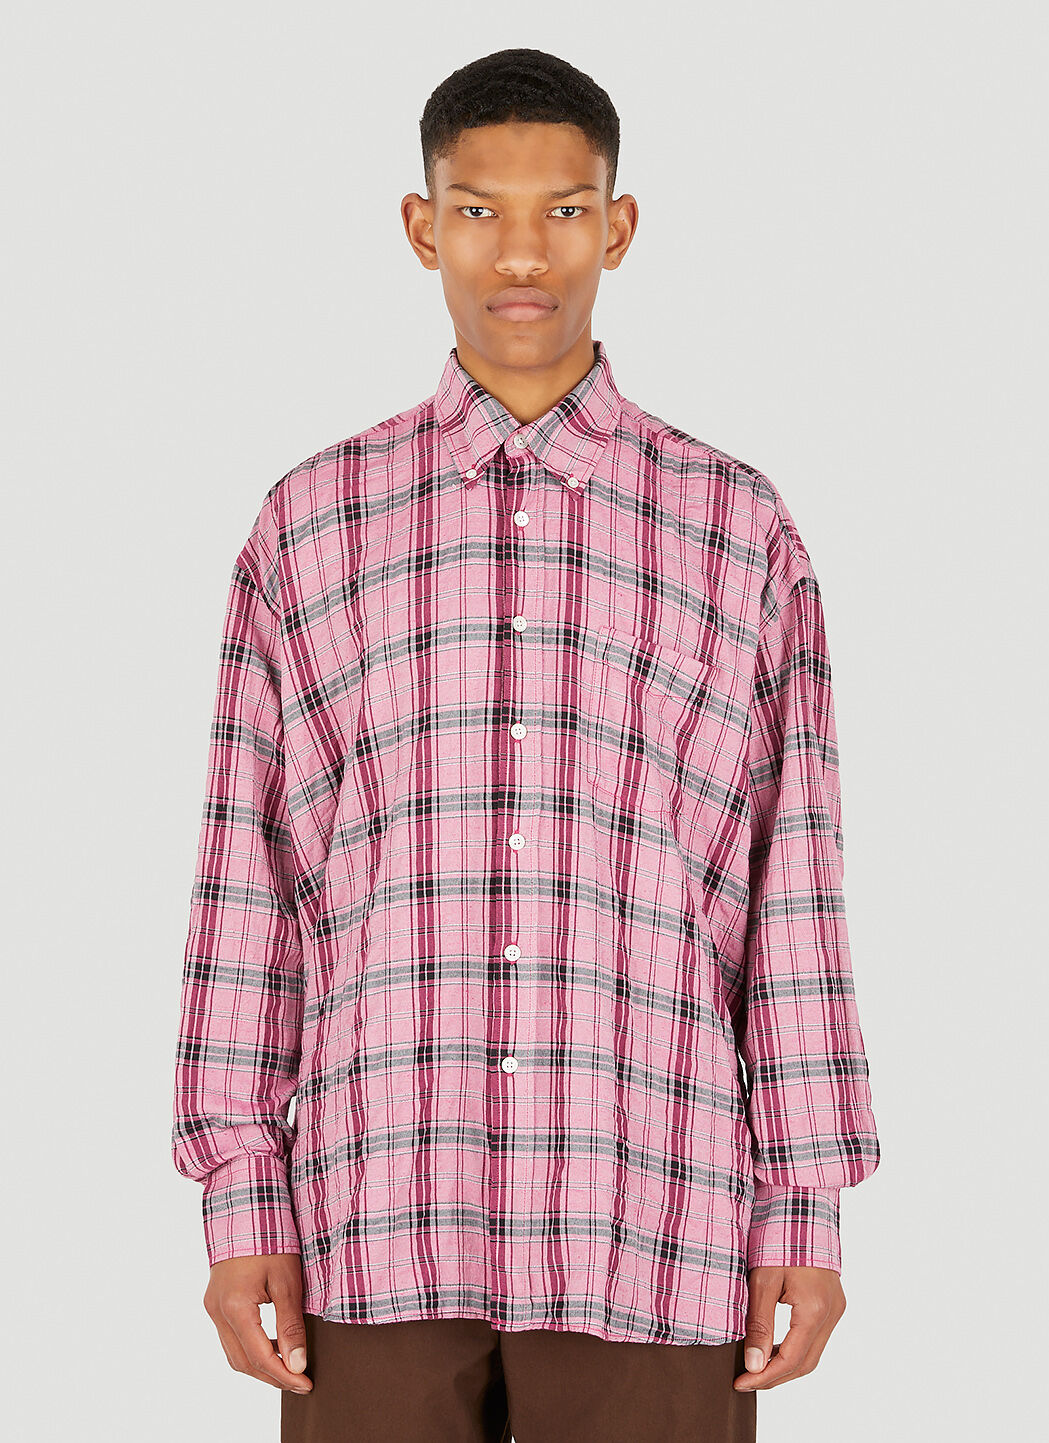 HOT OUR LEGACY CHECK SHIRT ピンク チェックシャツ Mの通販 by テモリ